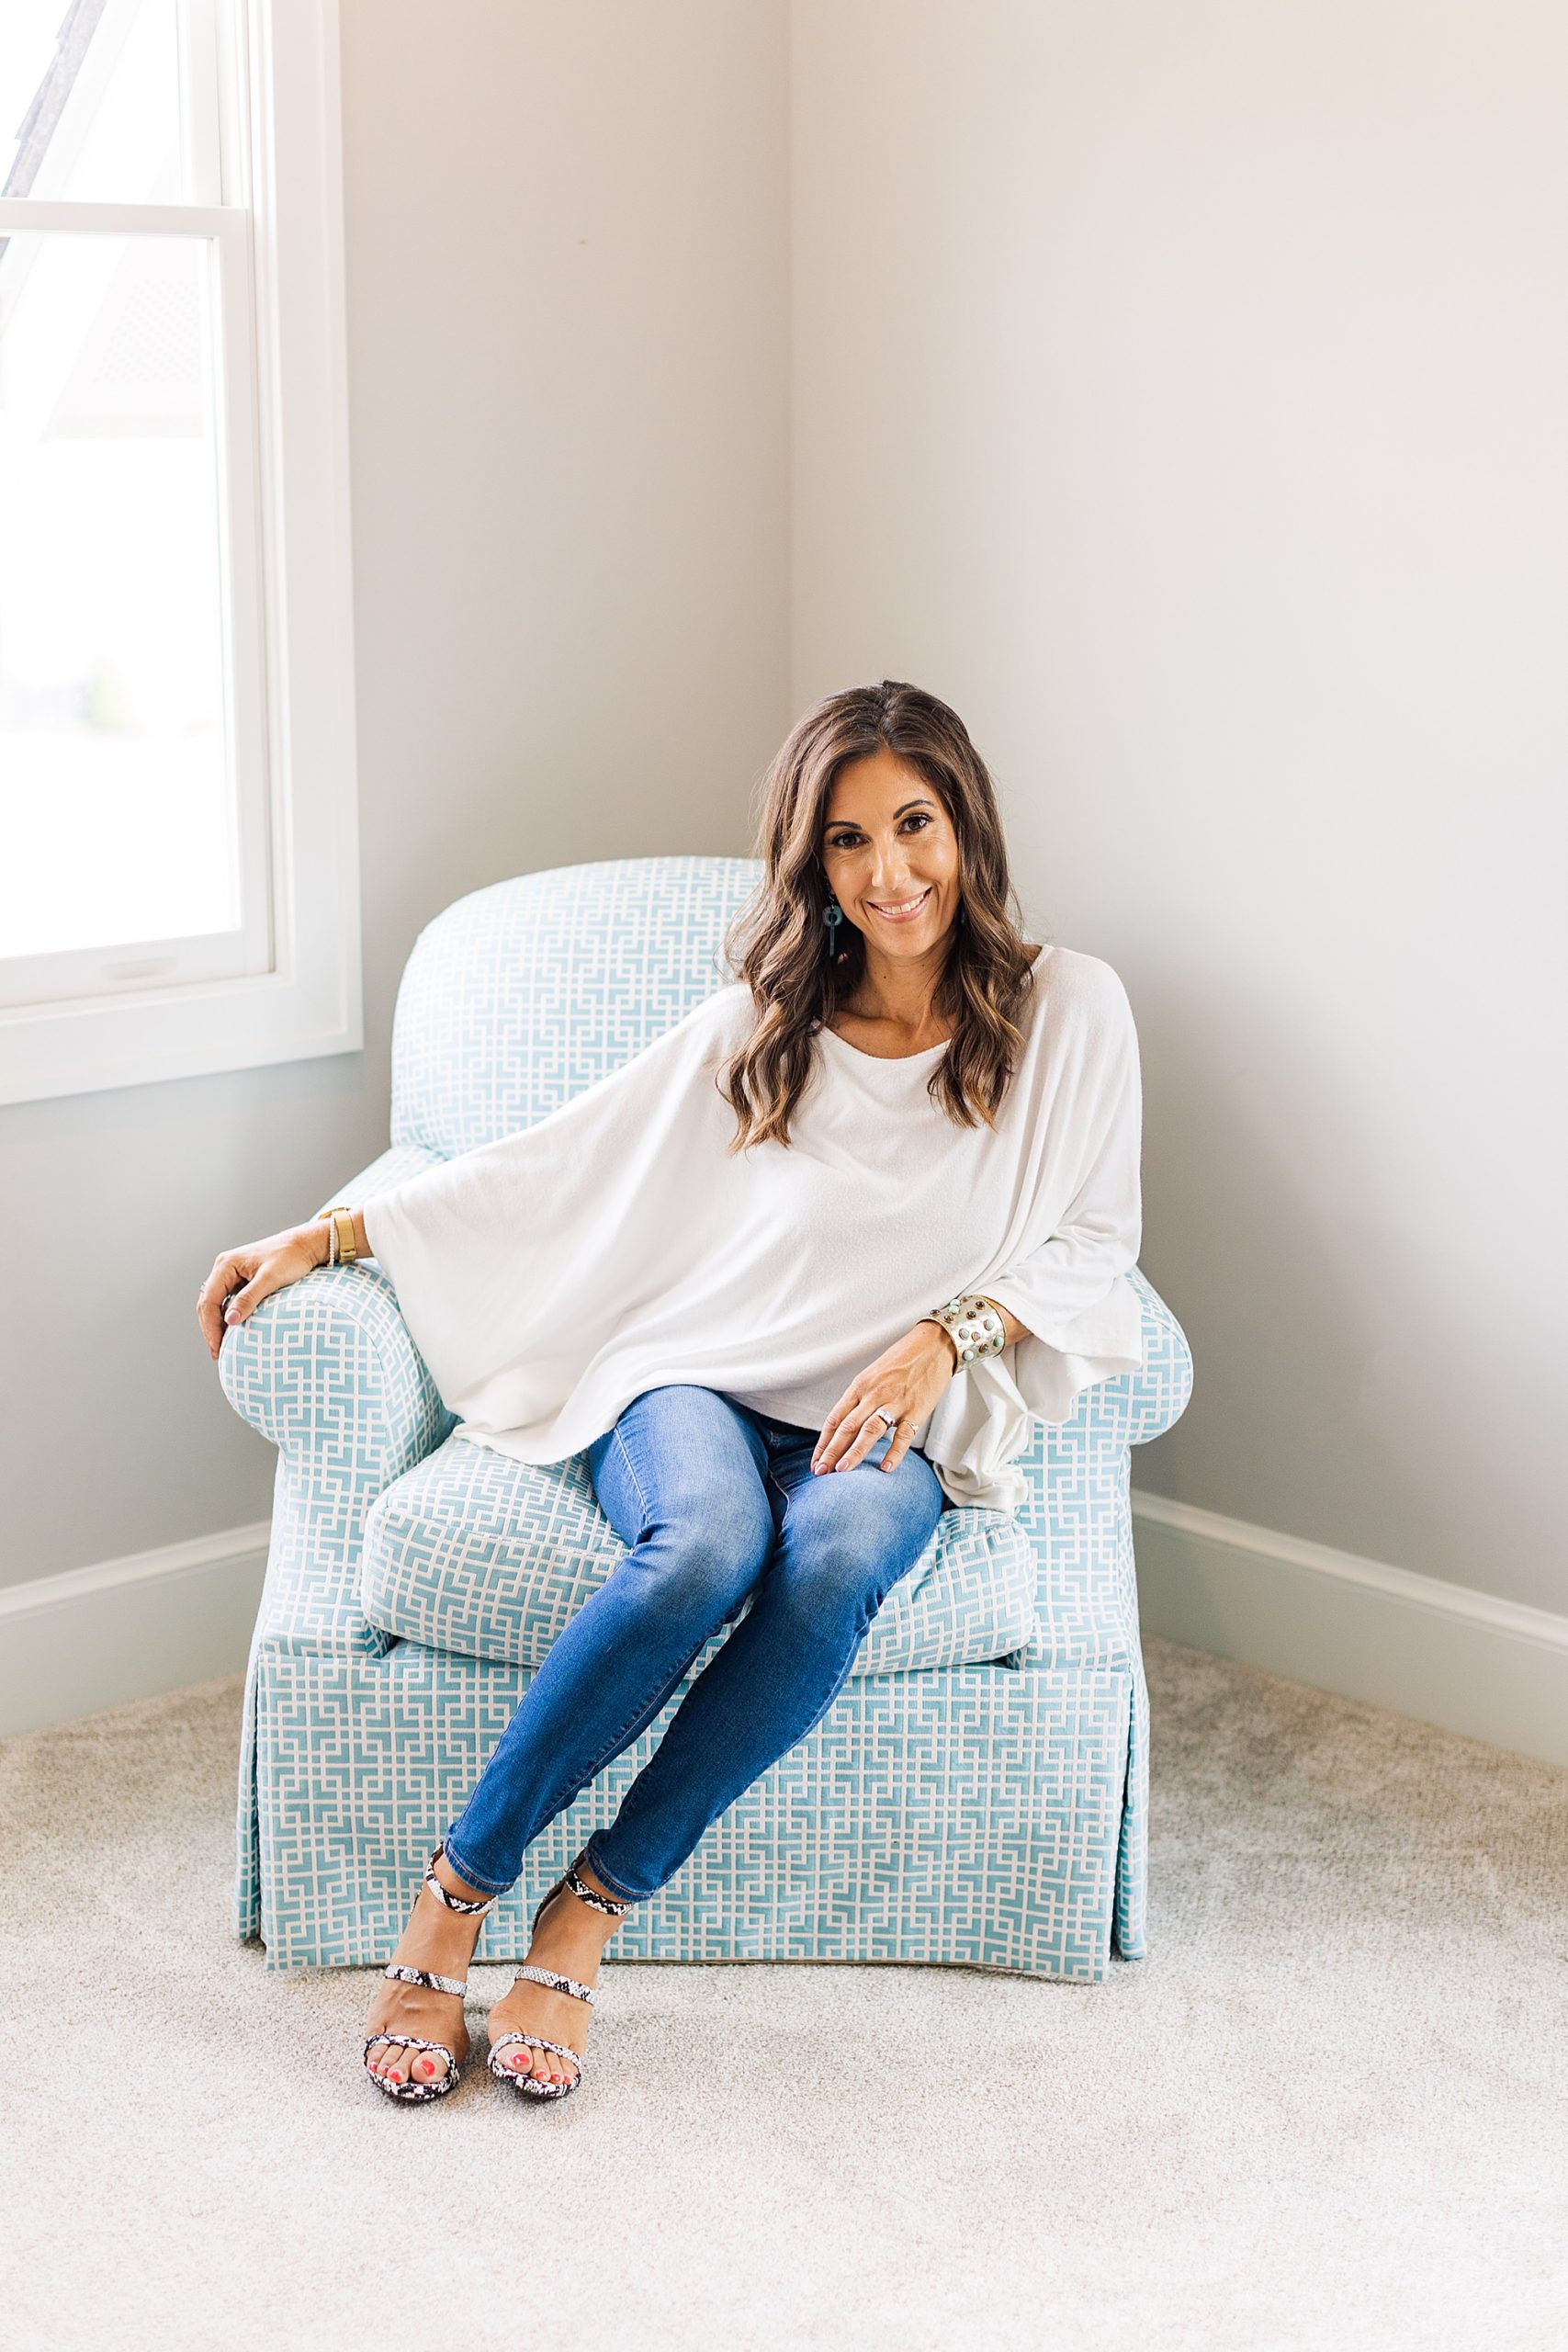 health coach sits in blue chair during Franklin branding photos